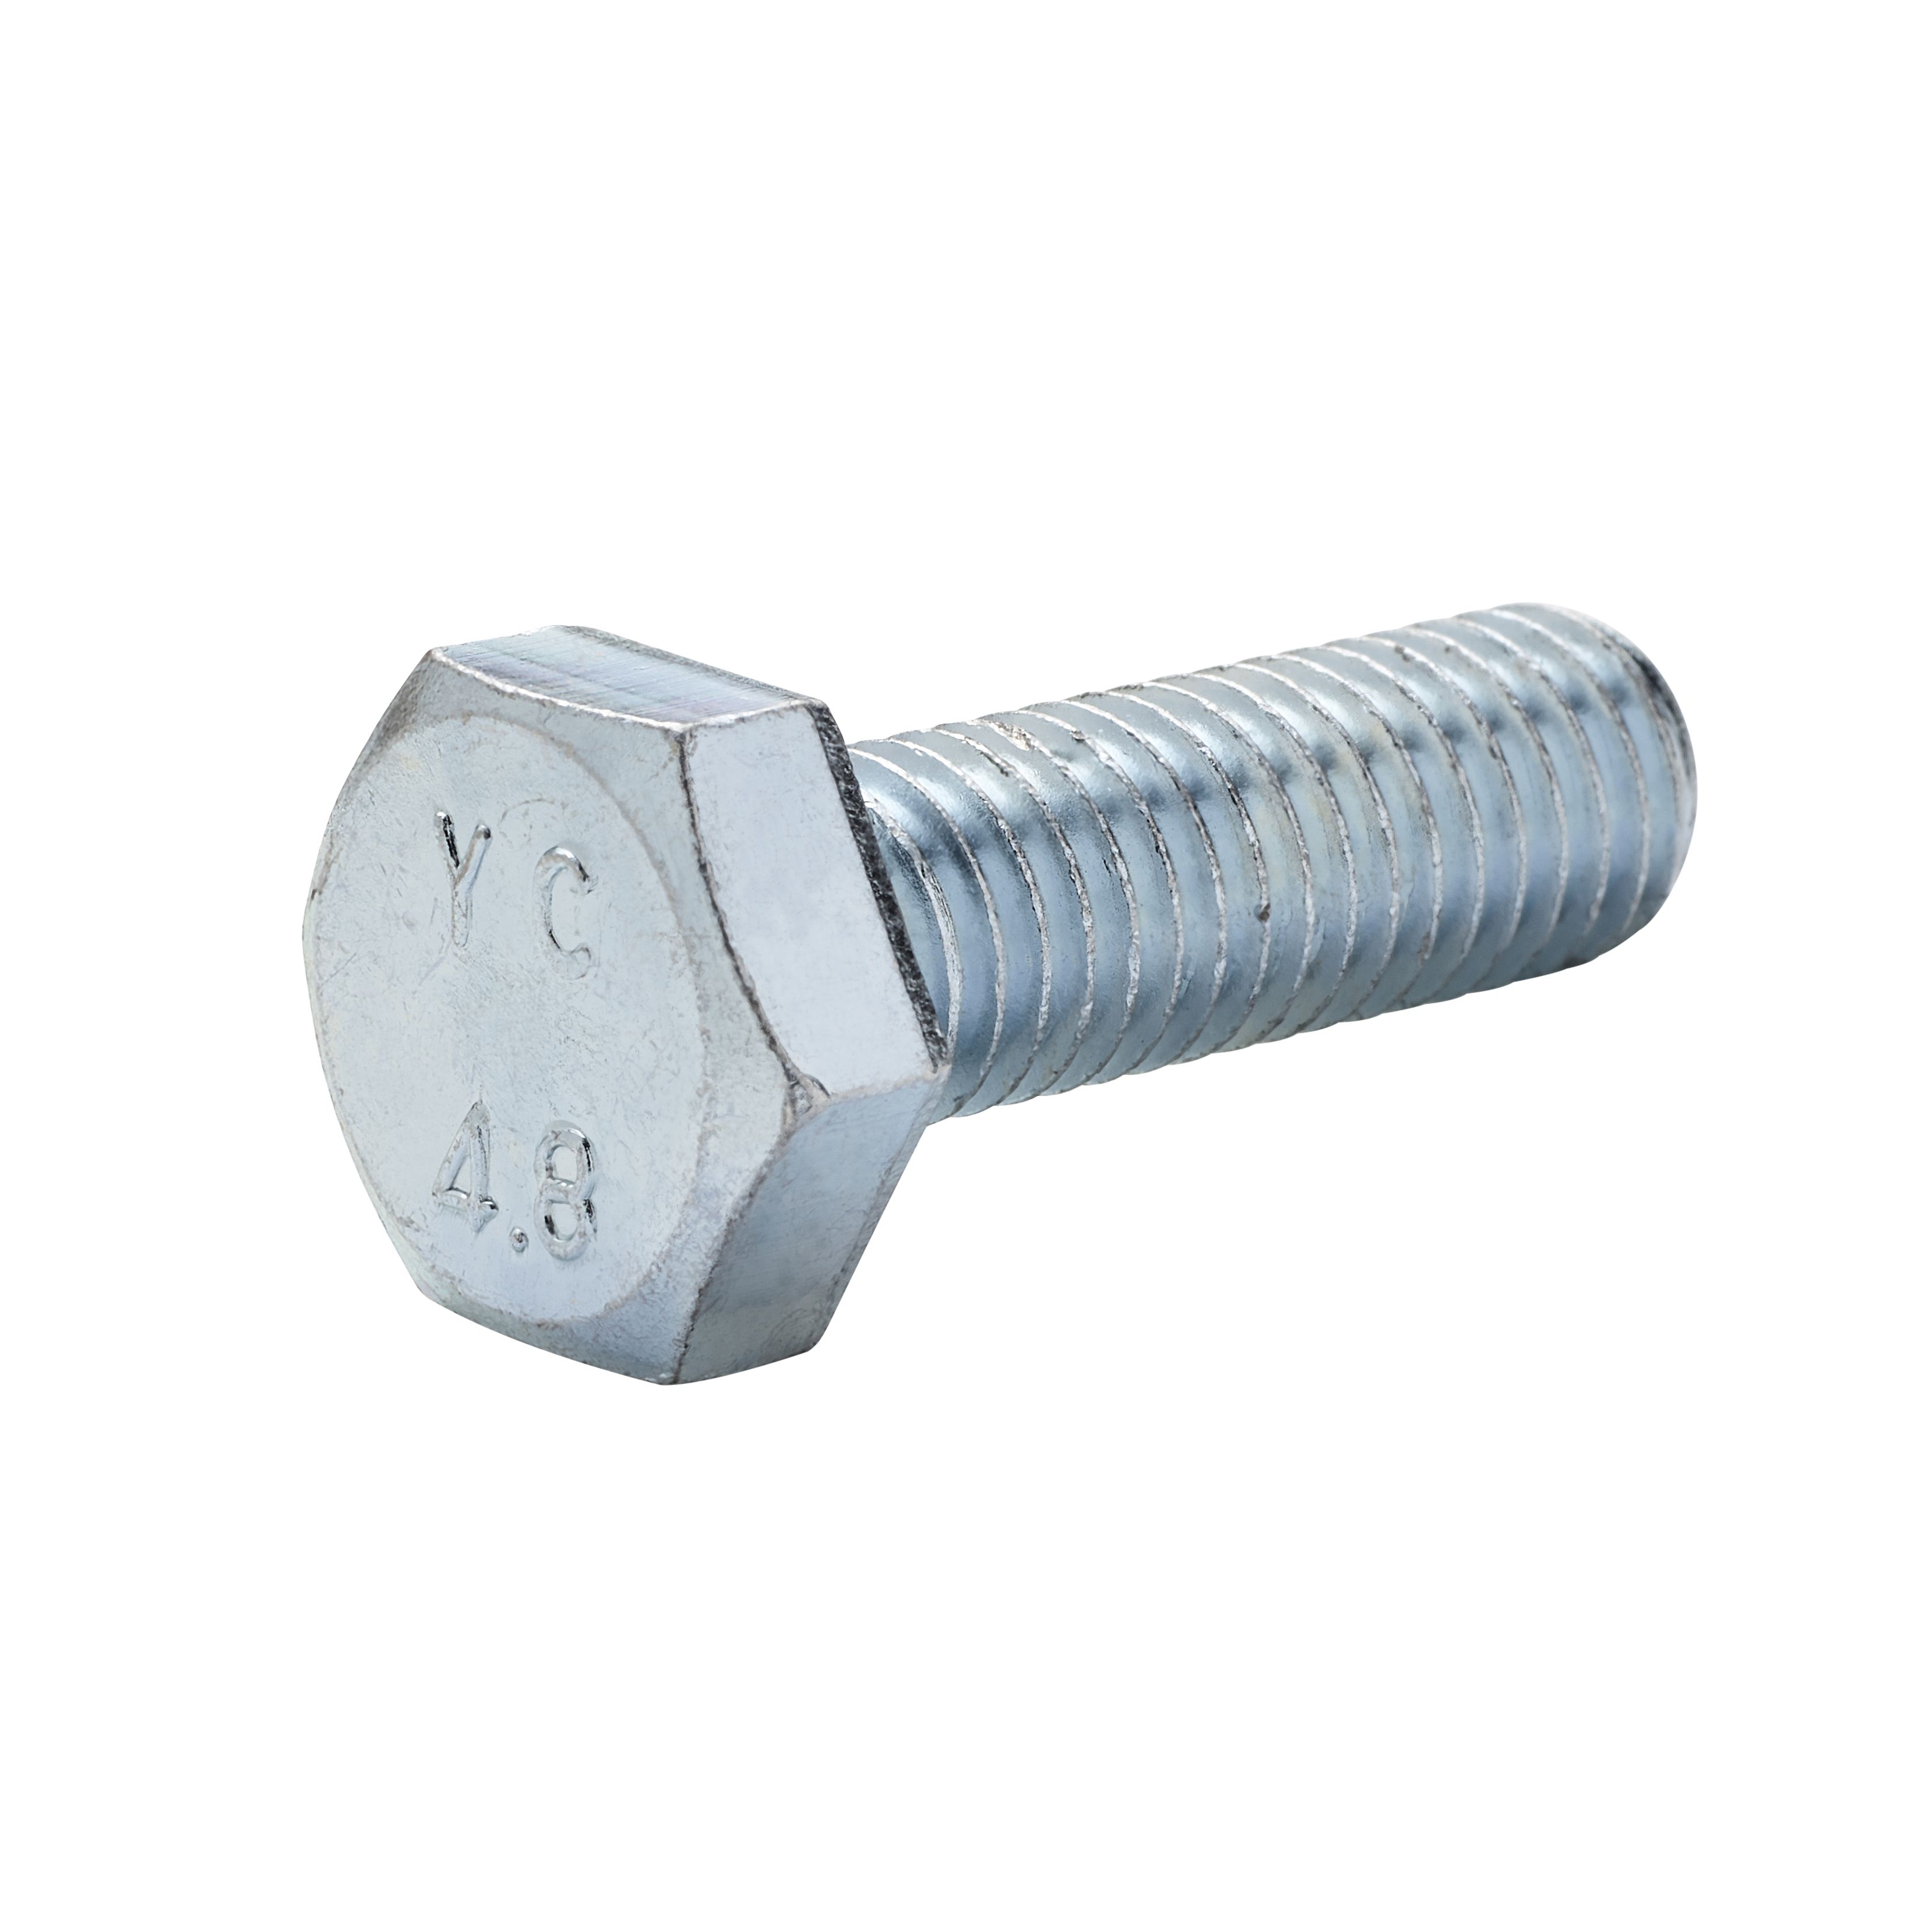 M10 Hex Bolt And Nut L30mm Pack Of 100 Departments Diy At Bandq 